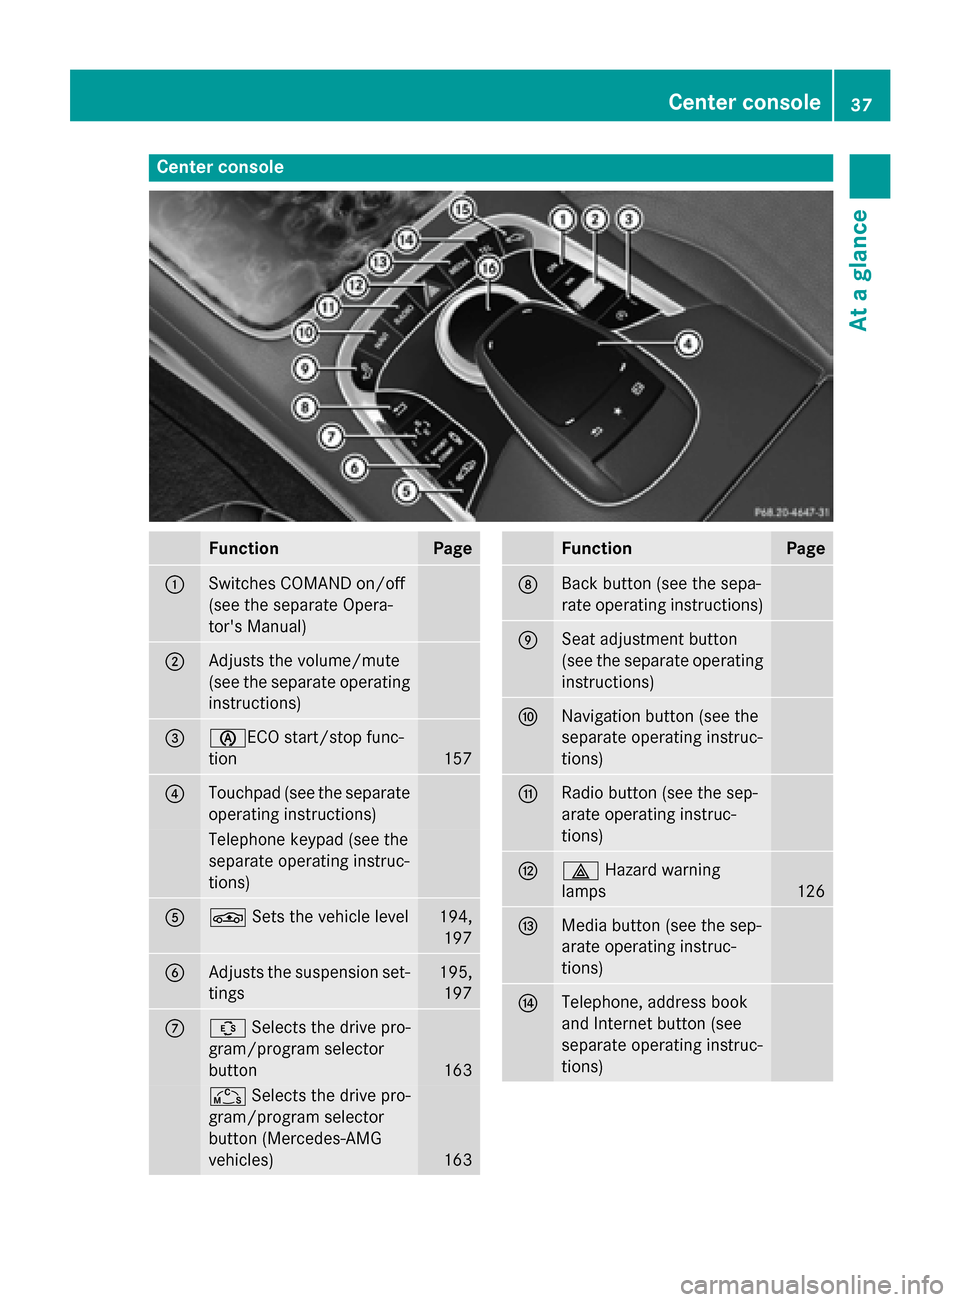 MERCEDES-BENZ S-Class COUPE 2016 C217 Owners Guide Center console
FunctionPage
:Switches COMAND on/off
(see the separate Opera-
tors Manual)
;Adjusts the volume/mute
(see the separate operating
instructions)
=èECO start/stop func-
tion
157
?Touchpad